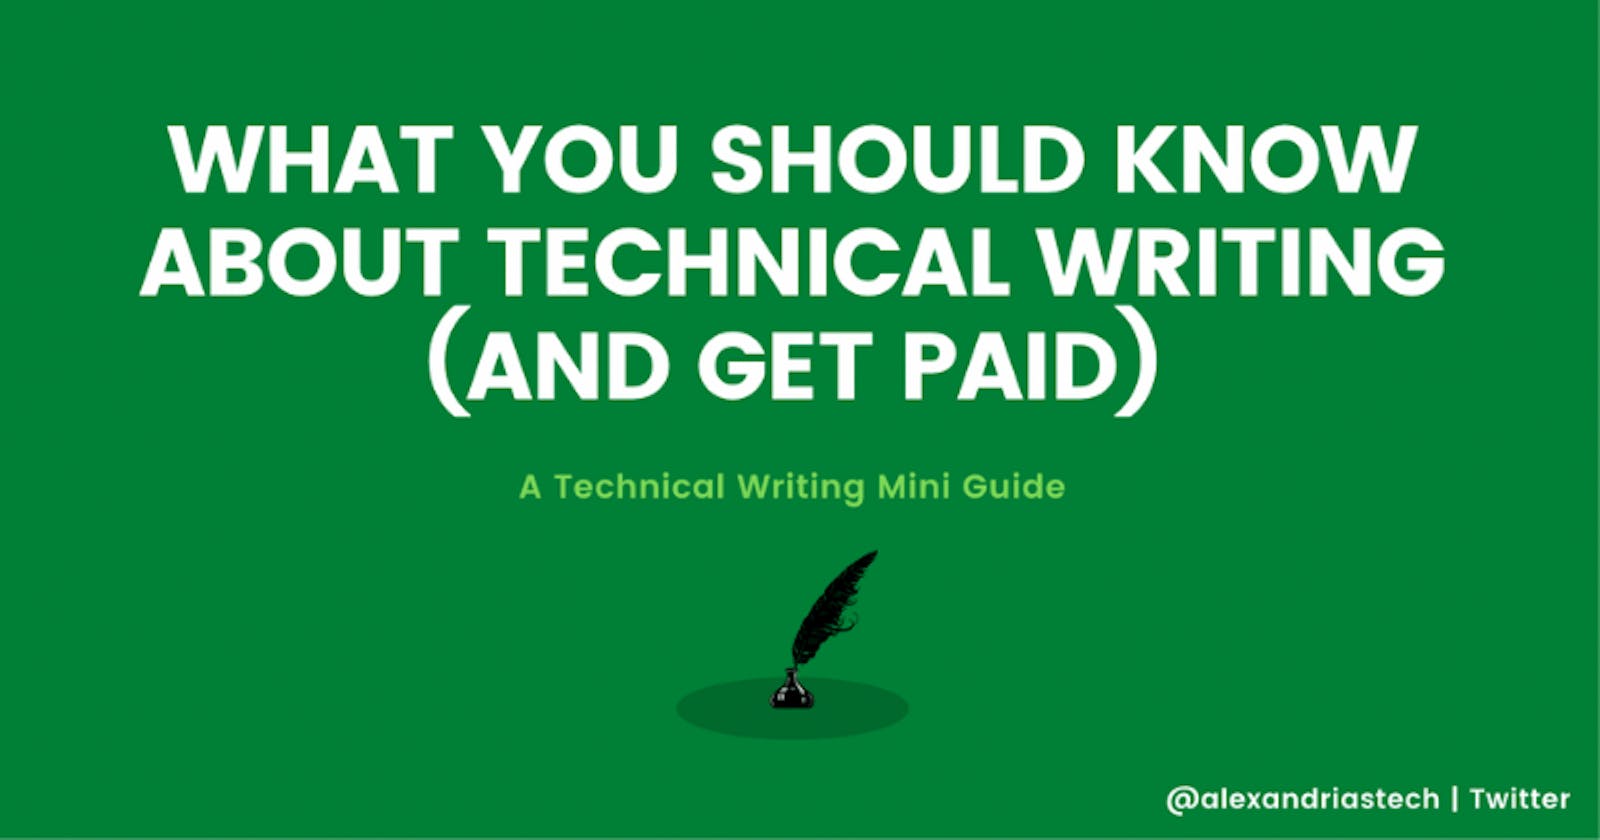 What You Should Know About Technical Writing (and Get Paid)